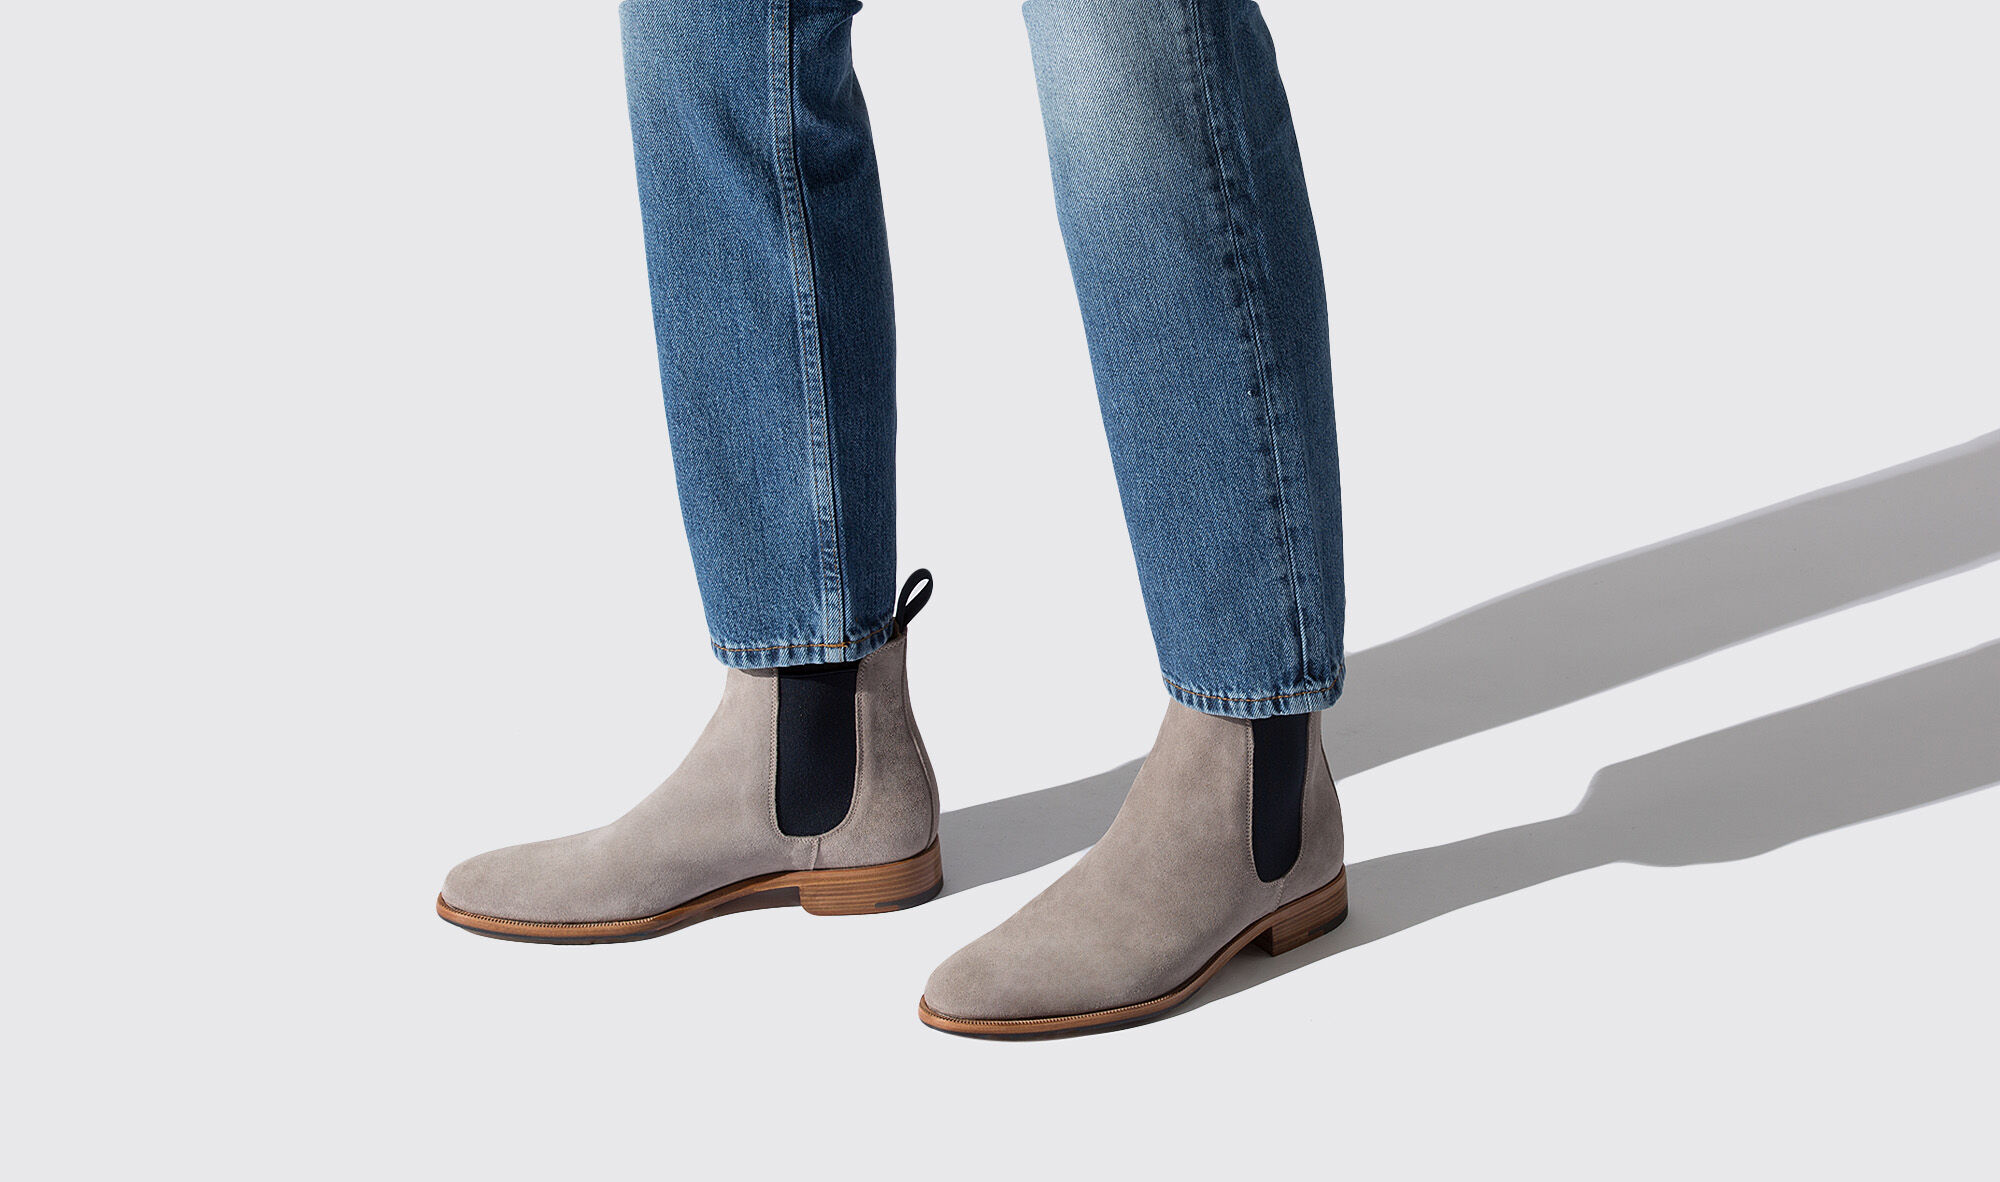 taupe chelsea boots mens